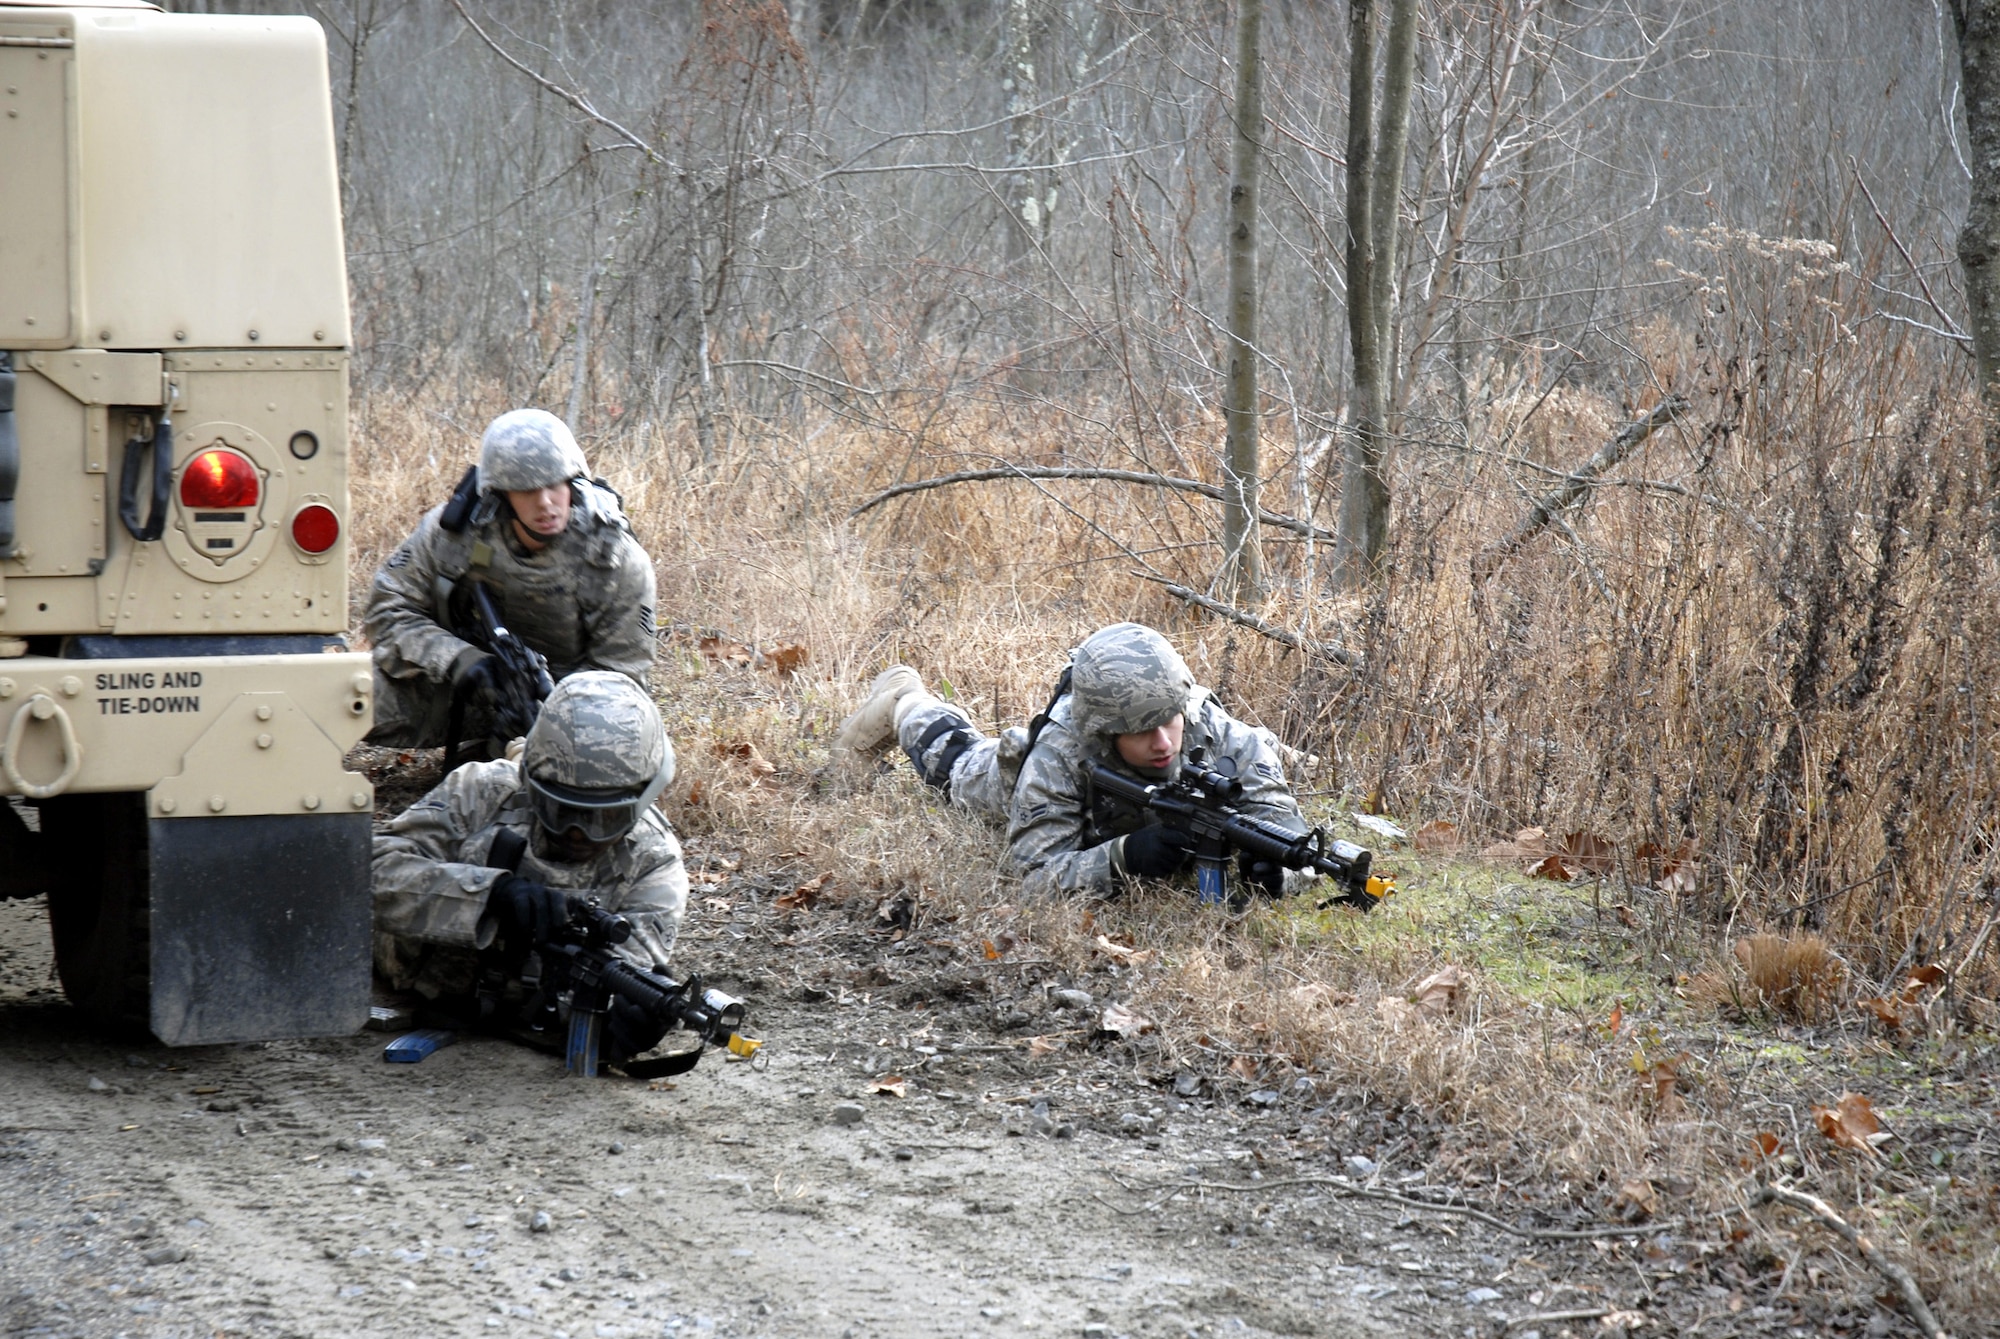 Students in the Air Force Phoenix Warrior Training Course responds to "enemy action" during mounted and dismounted patrol (convoy) training on a Fort Dix, N.J., range Dec. 5, 2008.  The course, taught by the U.S. Air Force Expeditionary Center's 421st Combat Training Squadron, prepares Air Force security forces for upcoming deployments.  (U.S. Air Force Photo/Staff Sgt. Paul R. Evans)